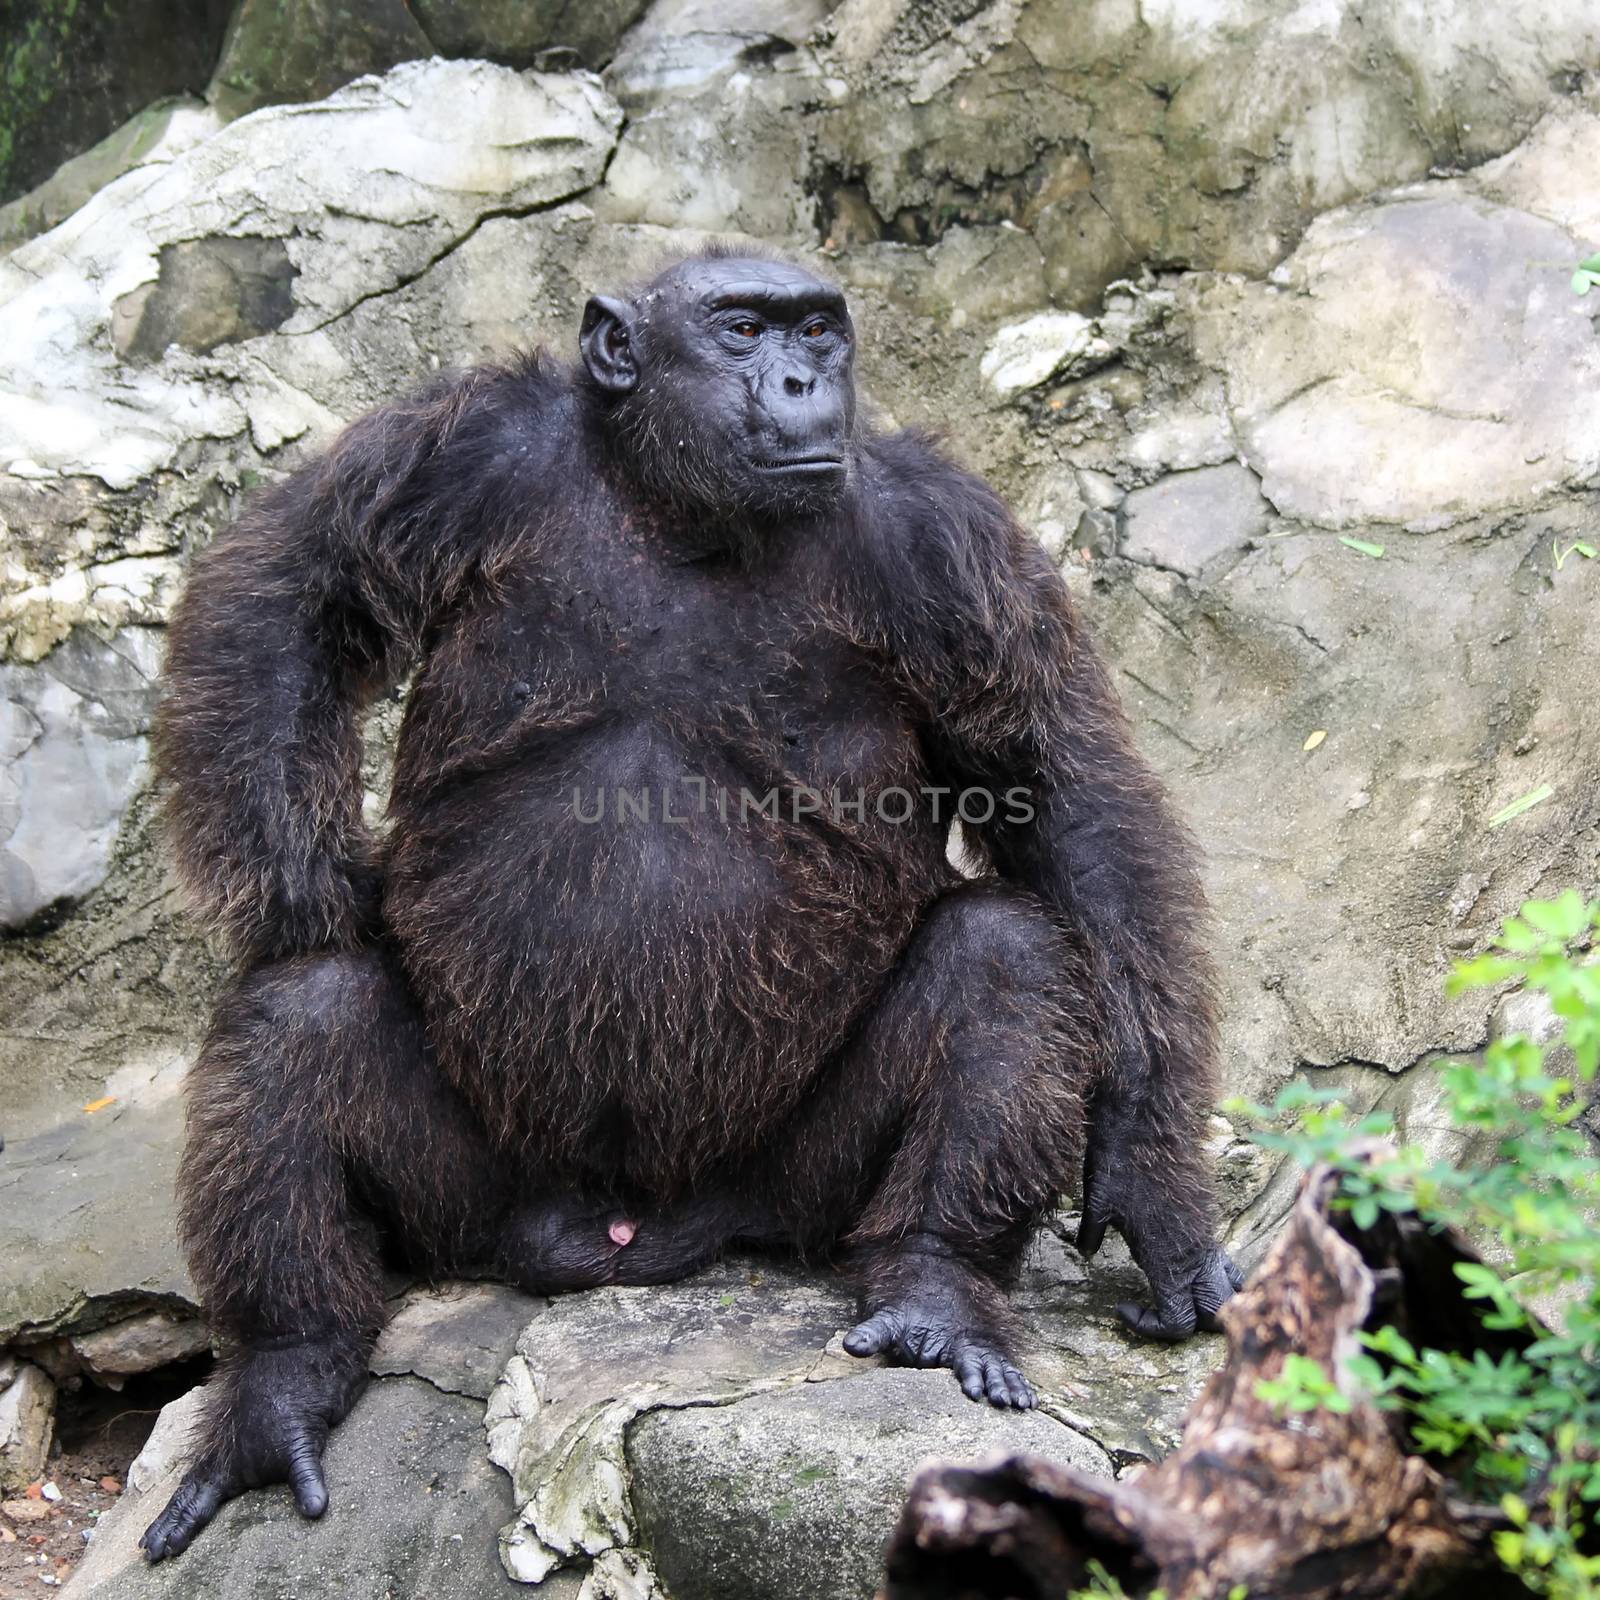 A gorilla in the zoo